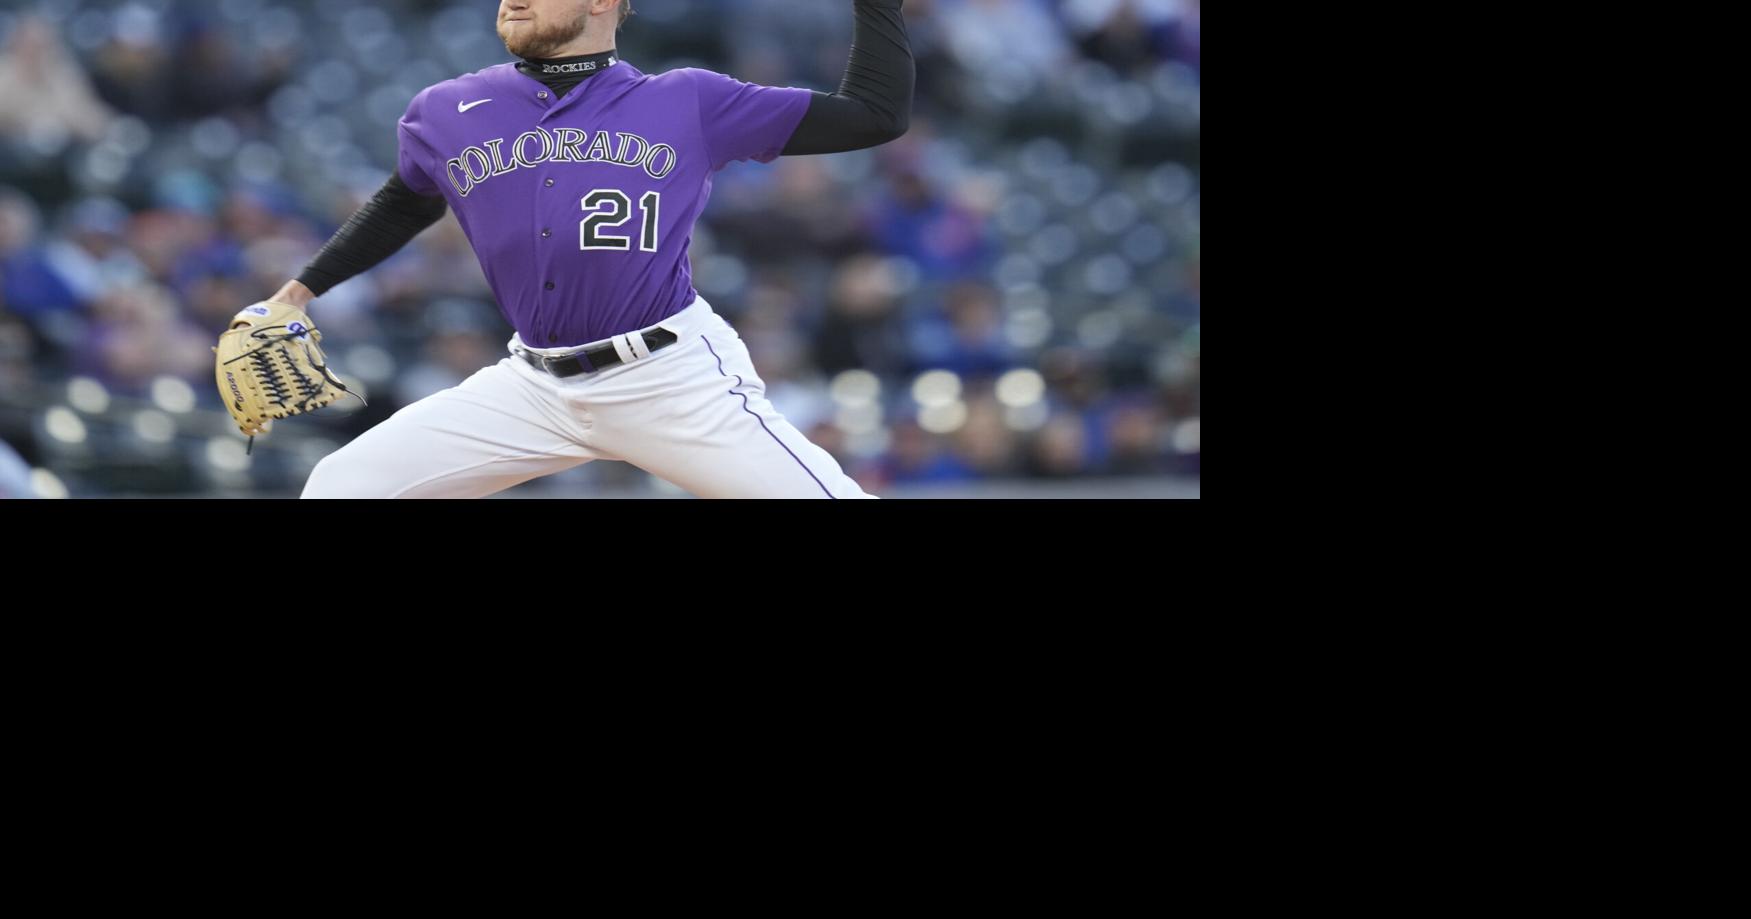 Kyle Freeland, Player of the Week (8/17-8/23), Kyle Freeland, the Quality  Start Machine, showed out last week., By Colorado Rockies Highlights